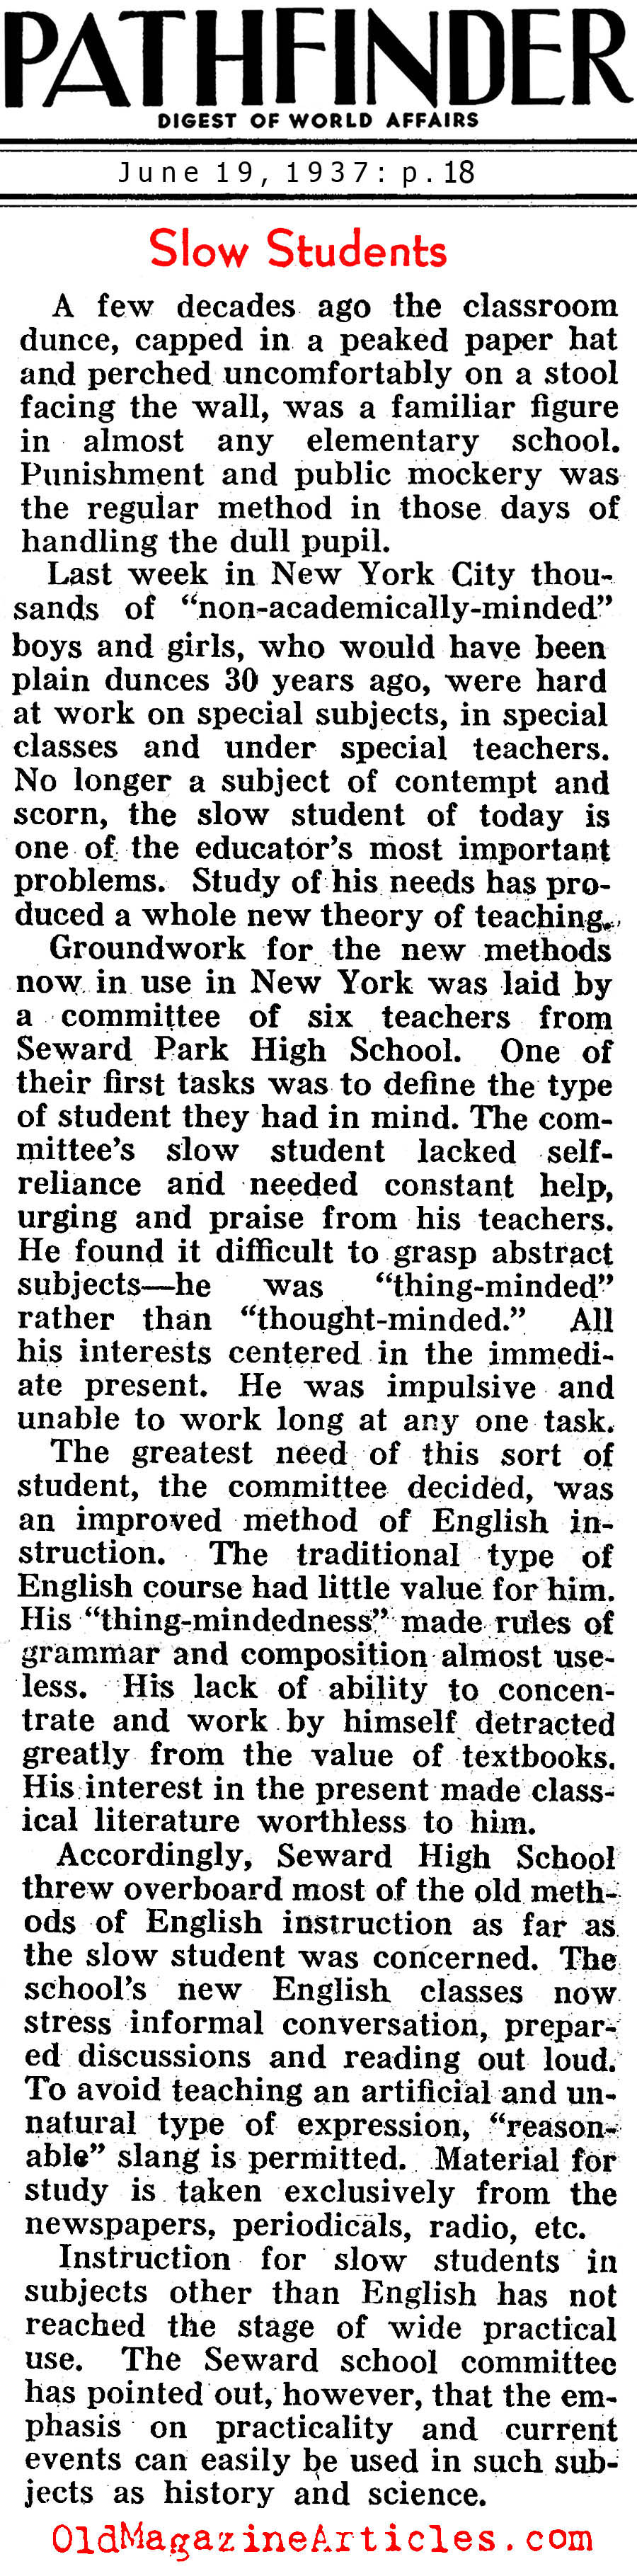 Trying to Understand Learning Disabilities (Pathfinder Magazine, 1937)